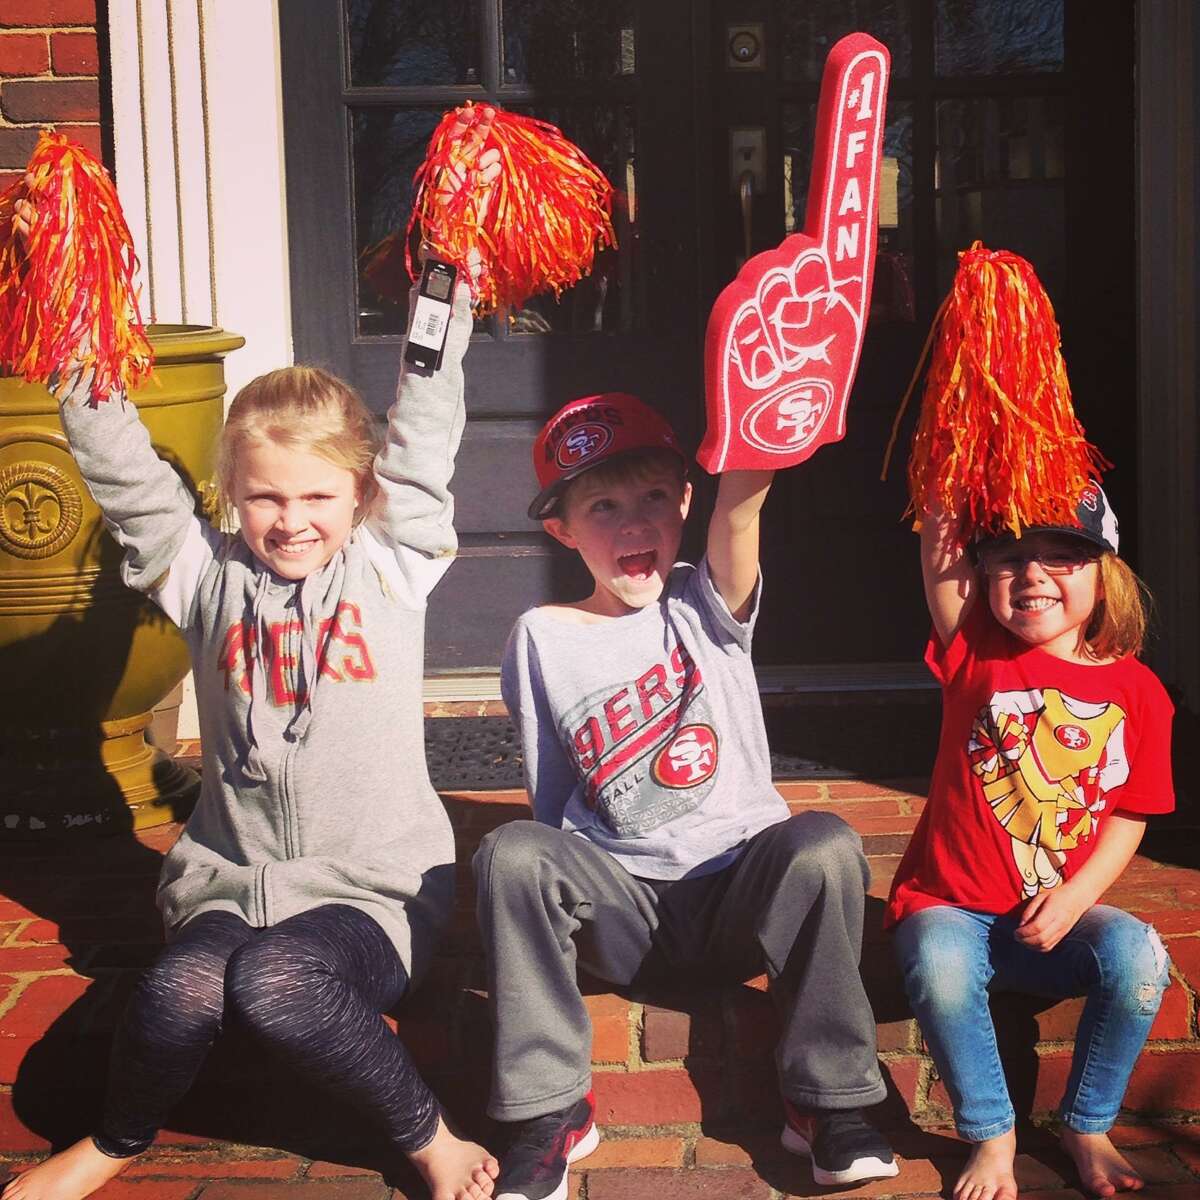 Kyle Shanahan's children (from left) Stella age 9, Carter age 7 and Lexi age 4 celebrate their father's new position as Head Coach of the San Francisco 49ers.